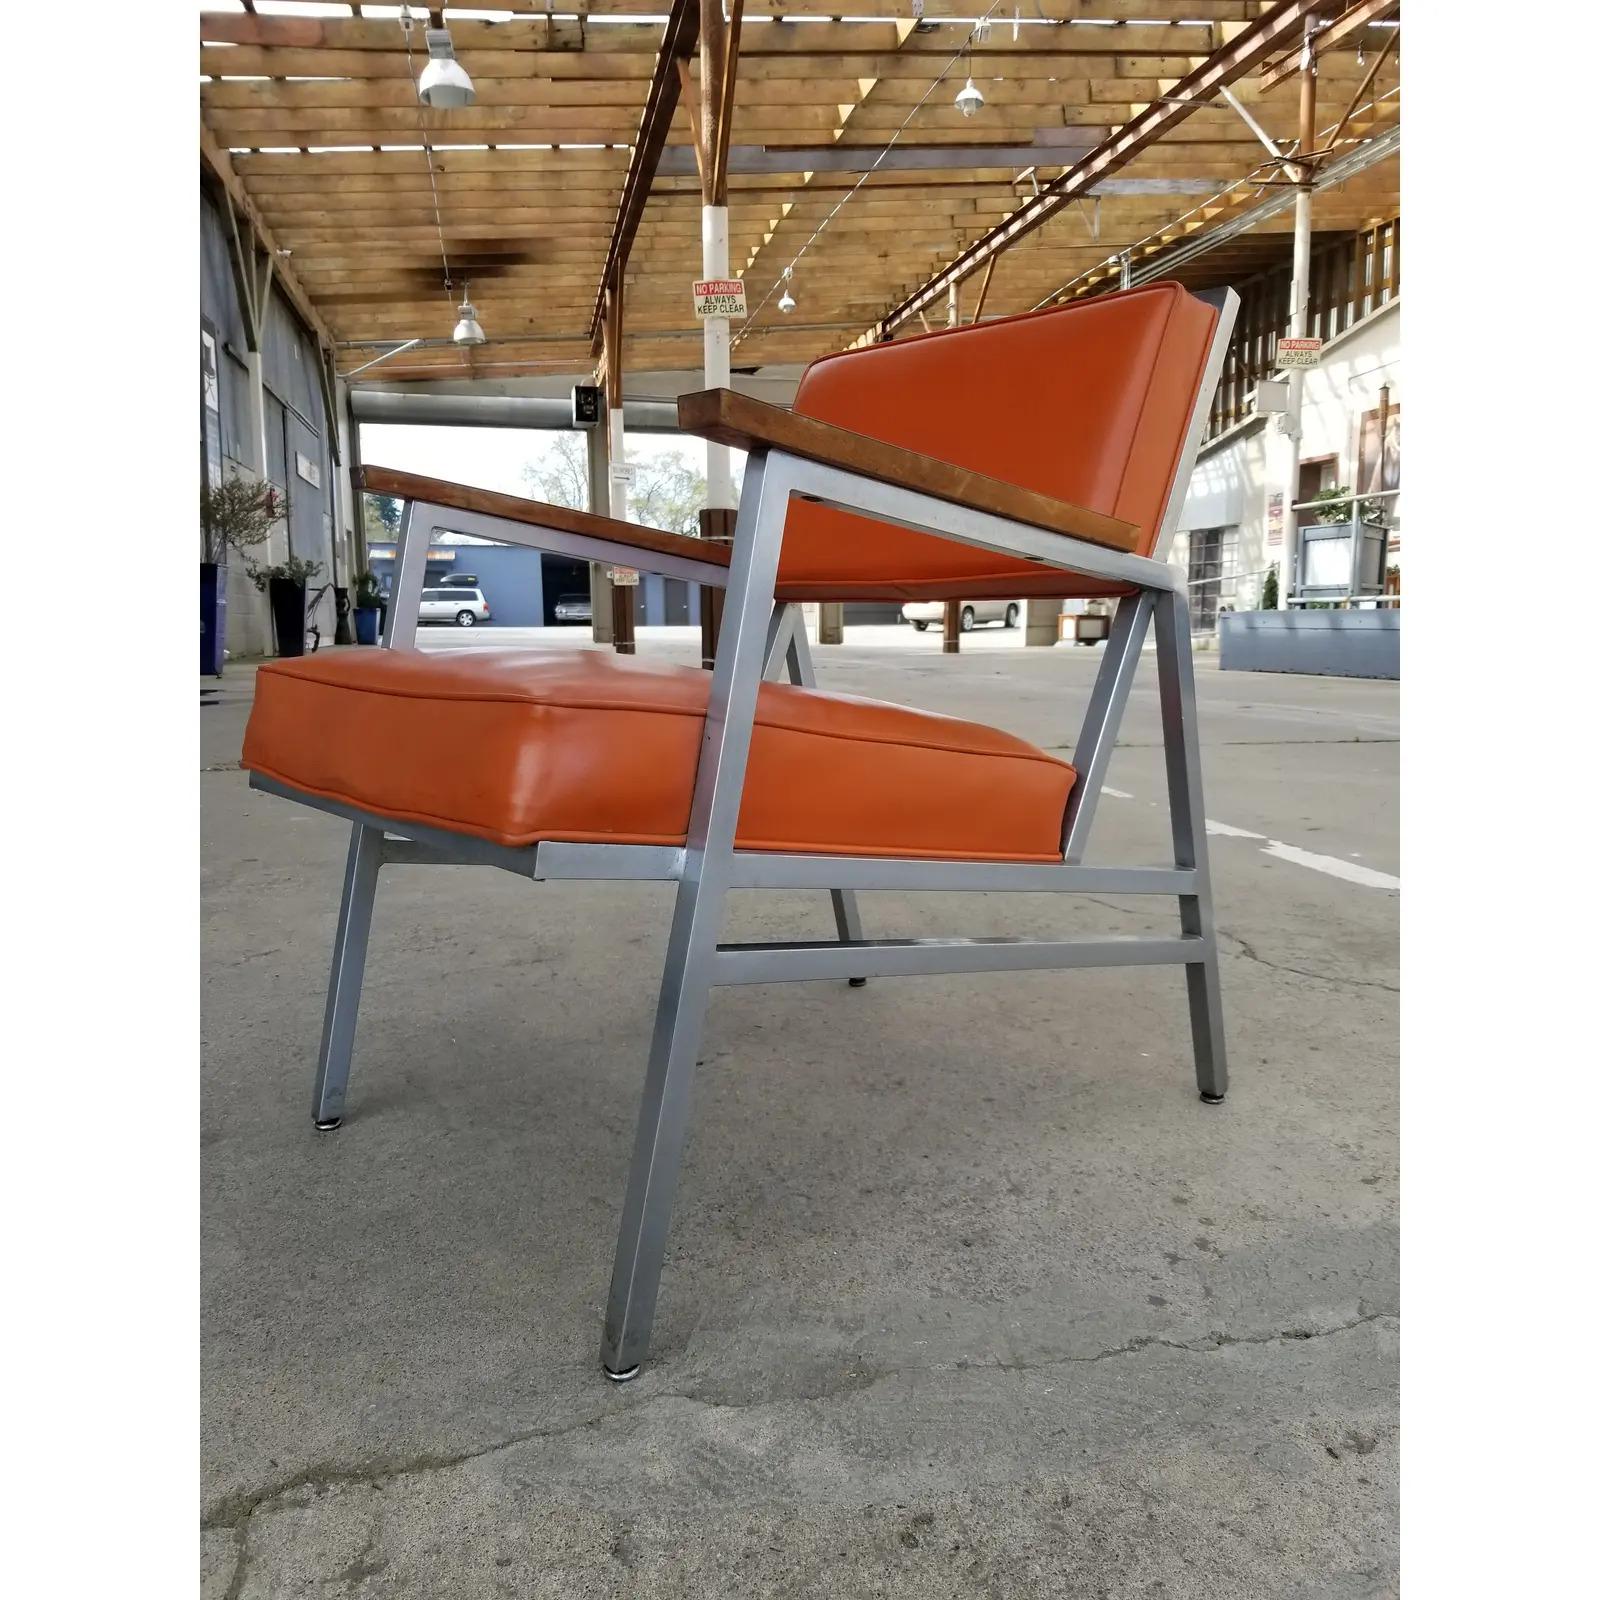 A Mid-Century Modern armchair originally intended for commercial use by Steelcase. Welded steel frame creates a very sturdy and durable chair. Fantastic, original orange vinyl upholstery in exceptionally good condition. A very nice example of